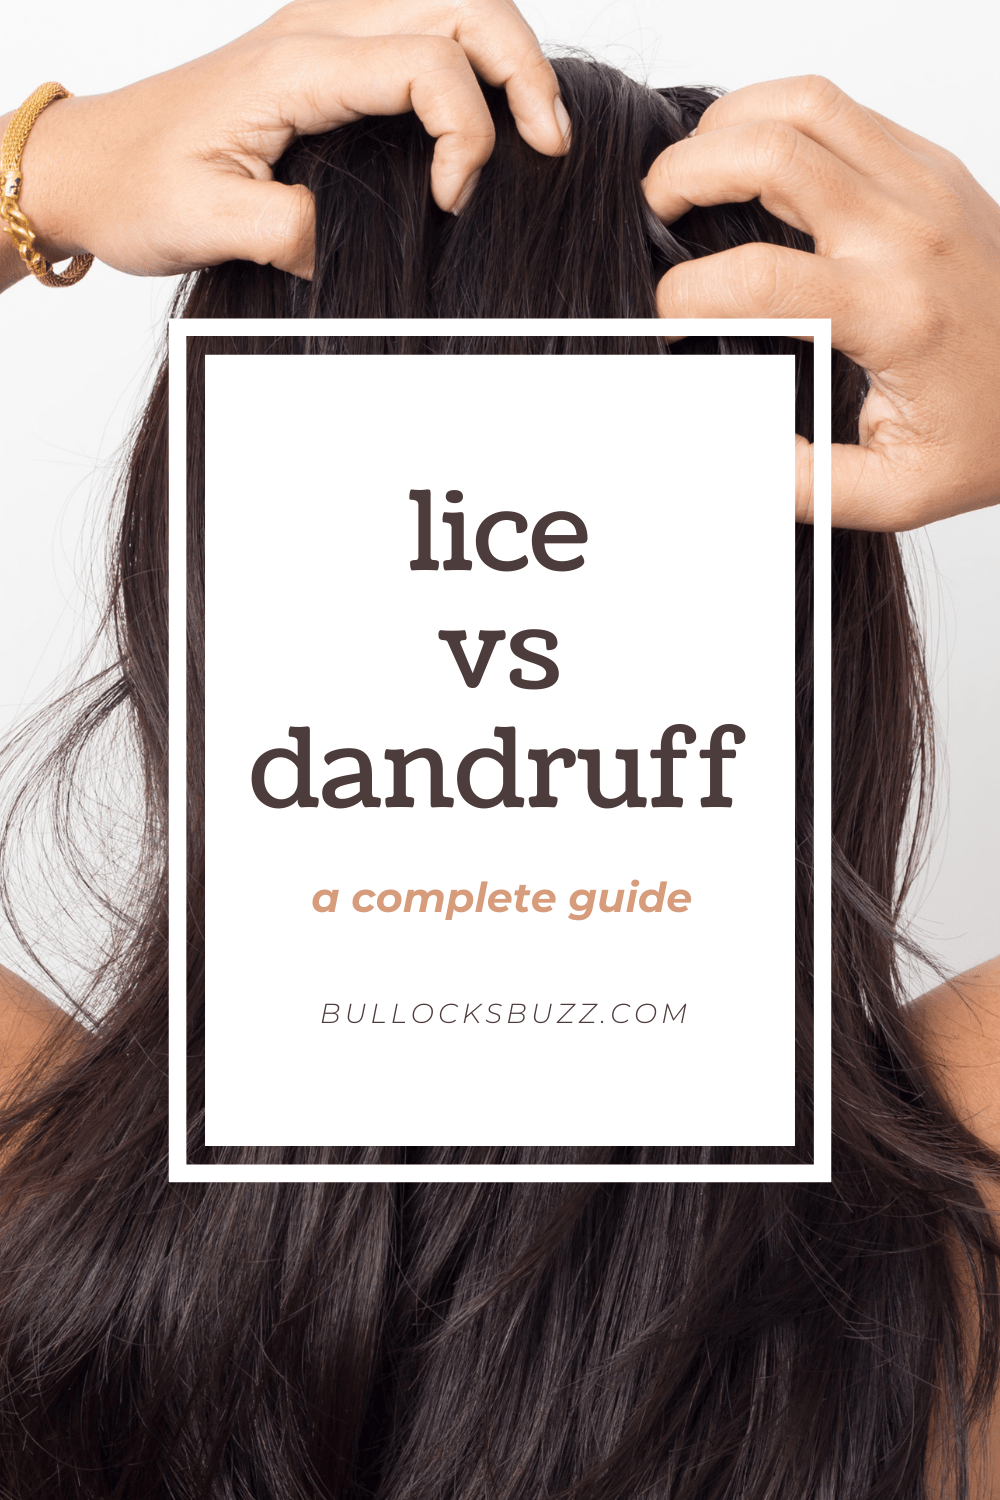 Lice are easily confused with dandruff, and knowing the difference is important. So I've put together this lice vs. dandruff guide to help.